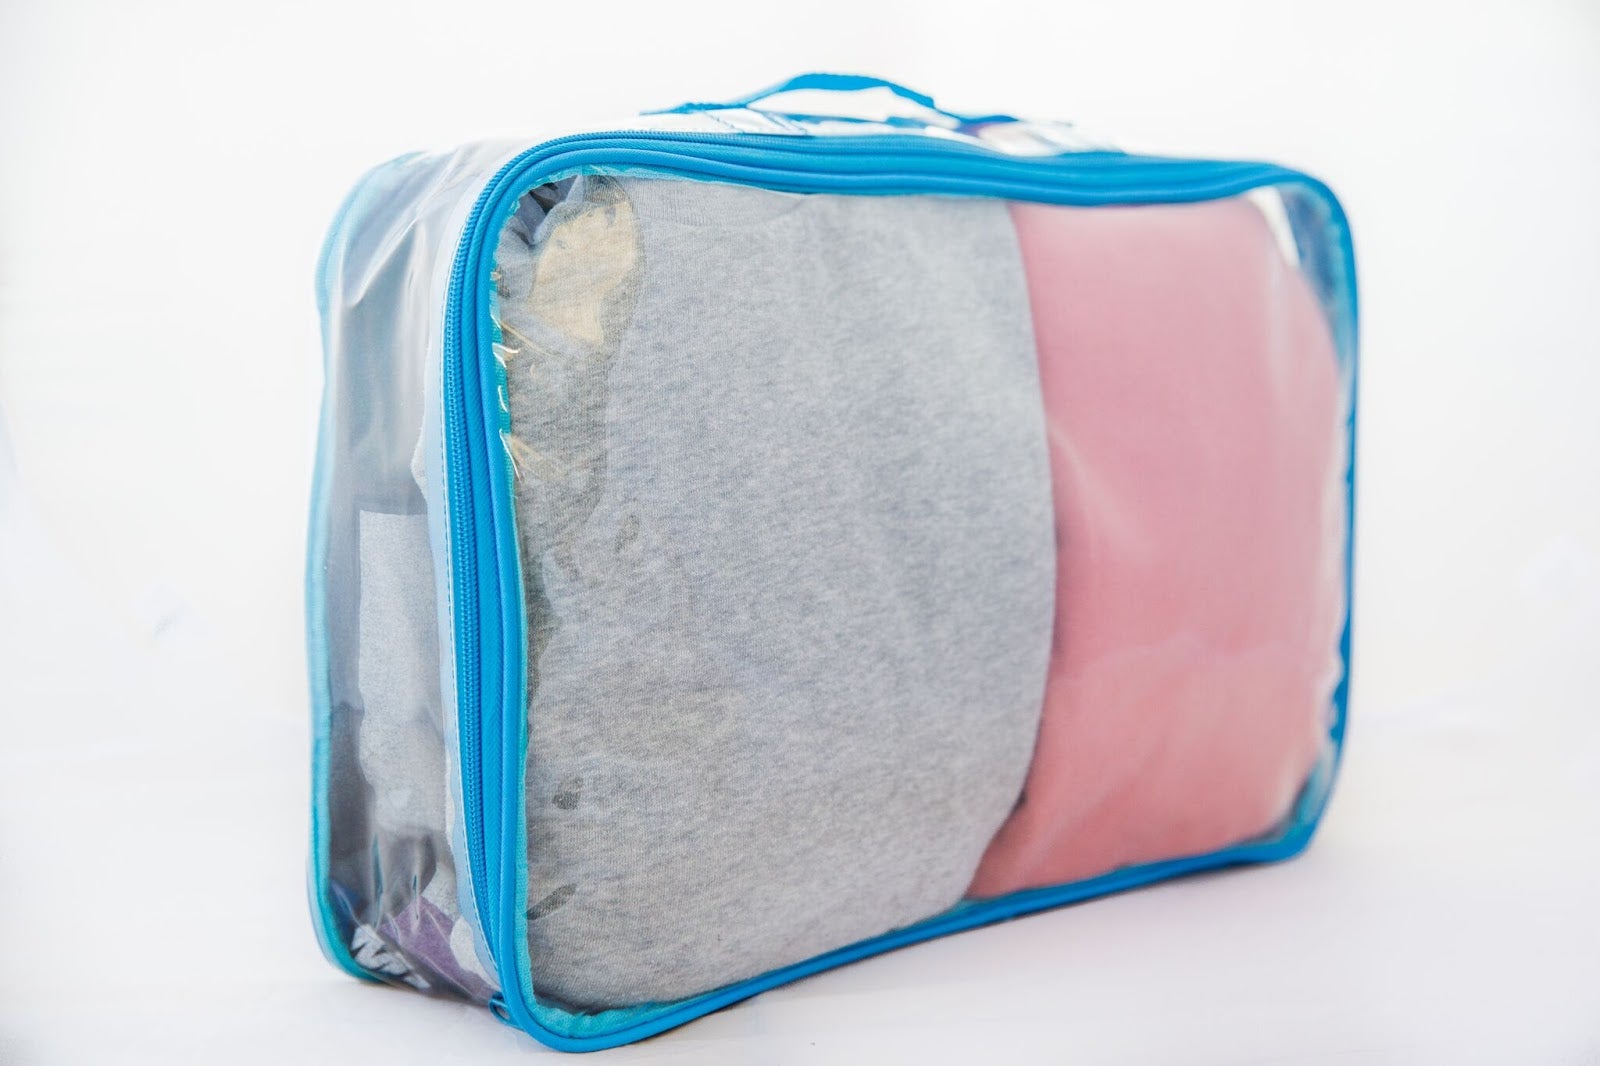 Turquoise clear large packing cube for carry-on luggage